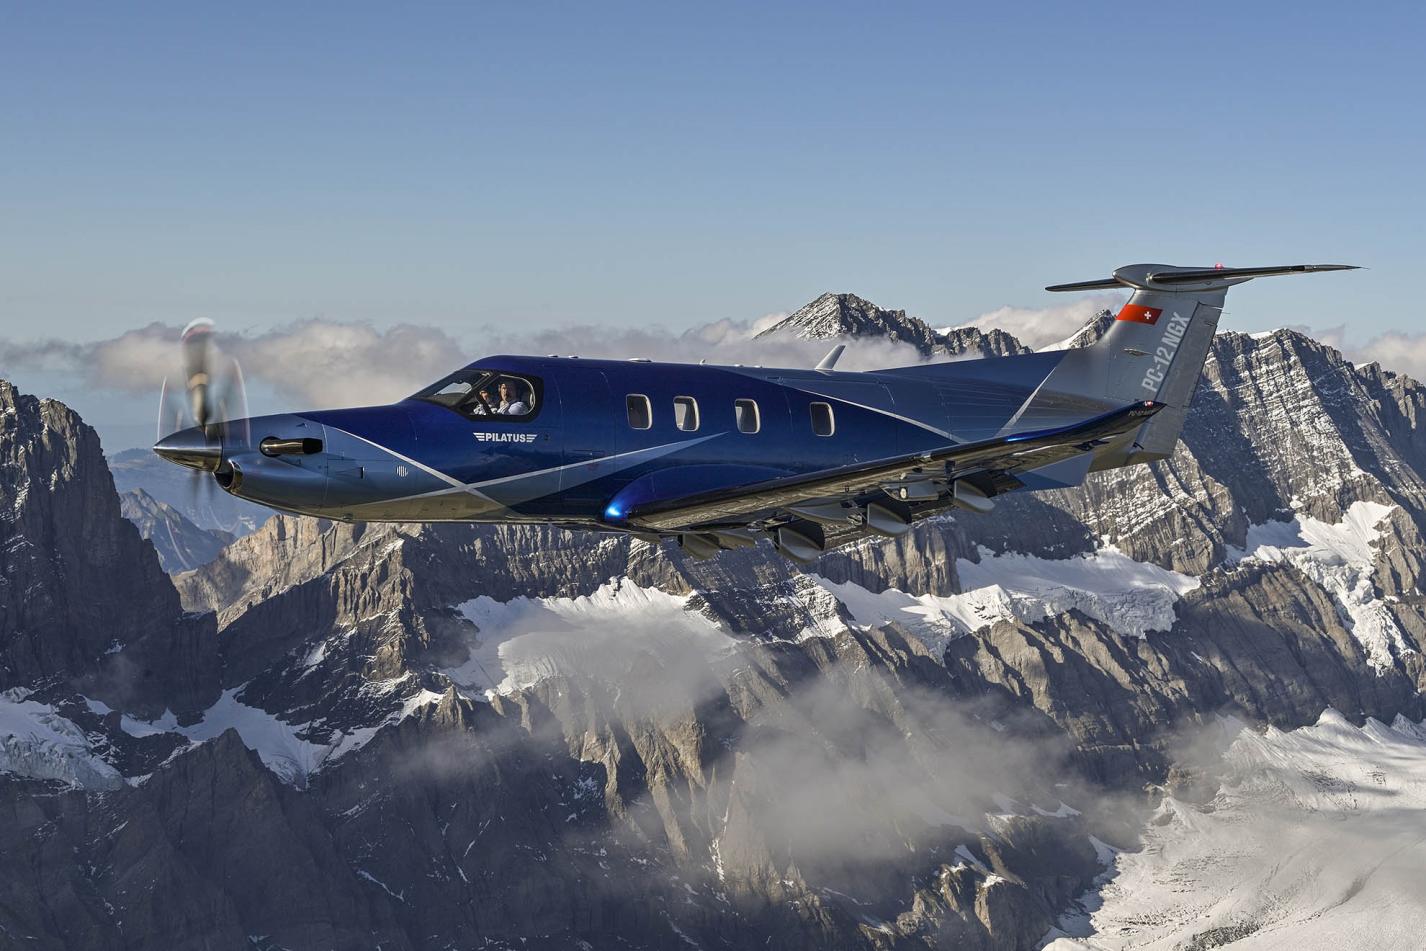 What Are the Maintenance Requirements for Pilatus Aircraft?